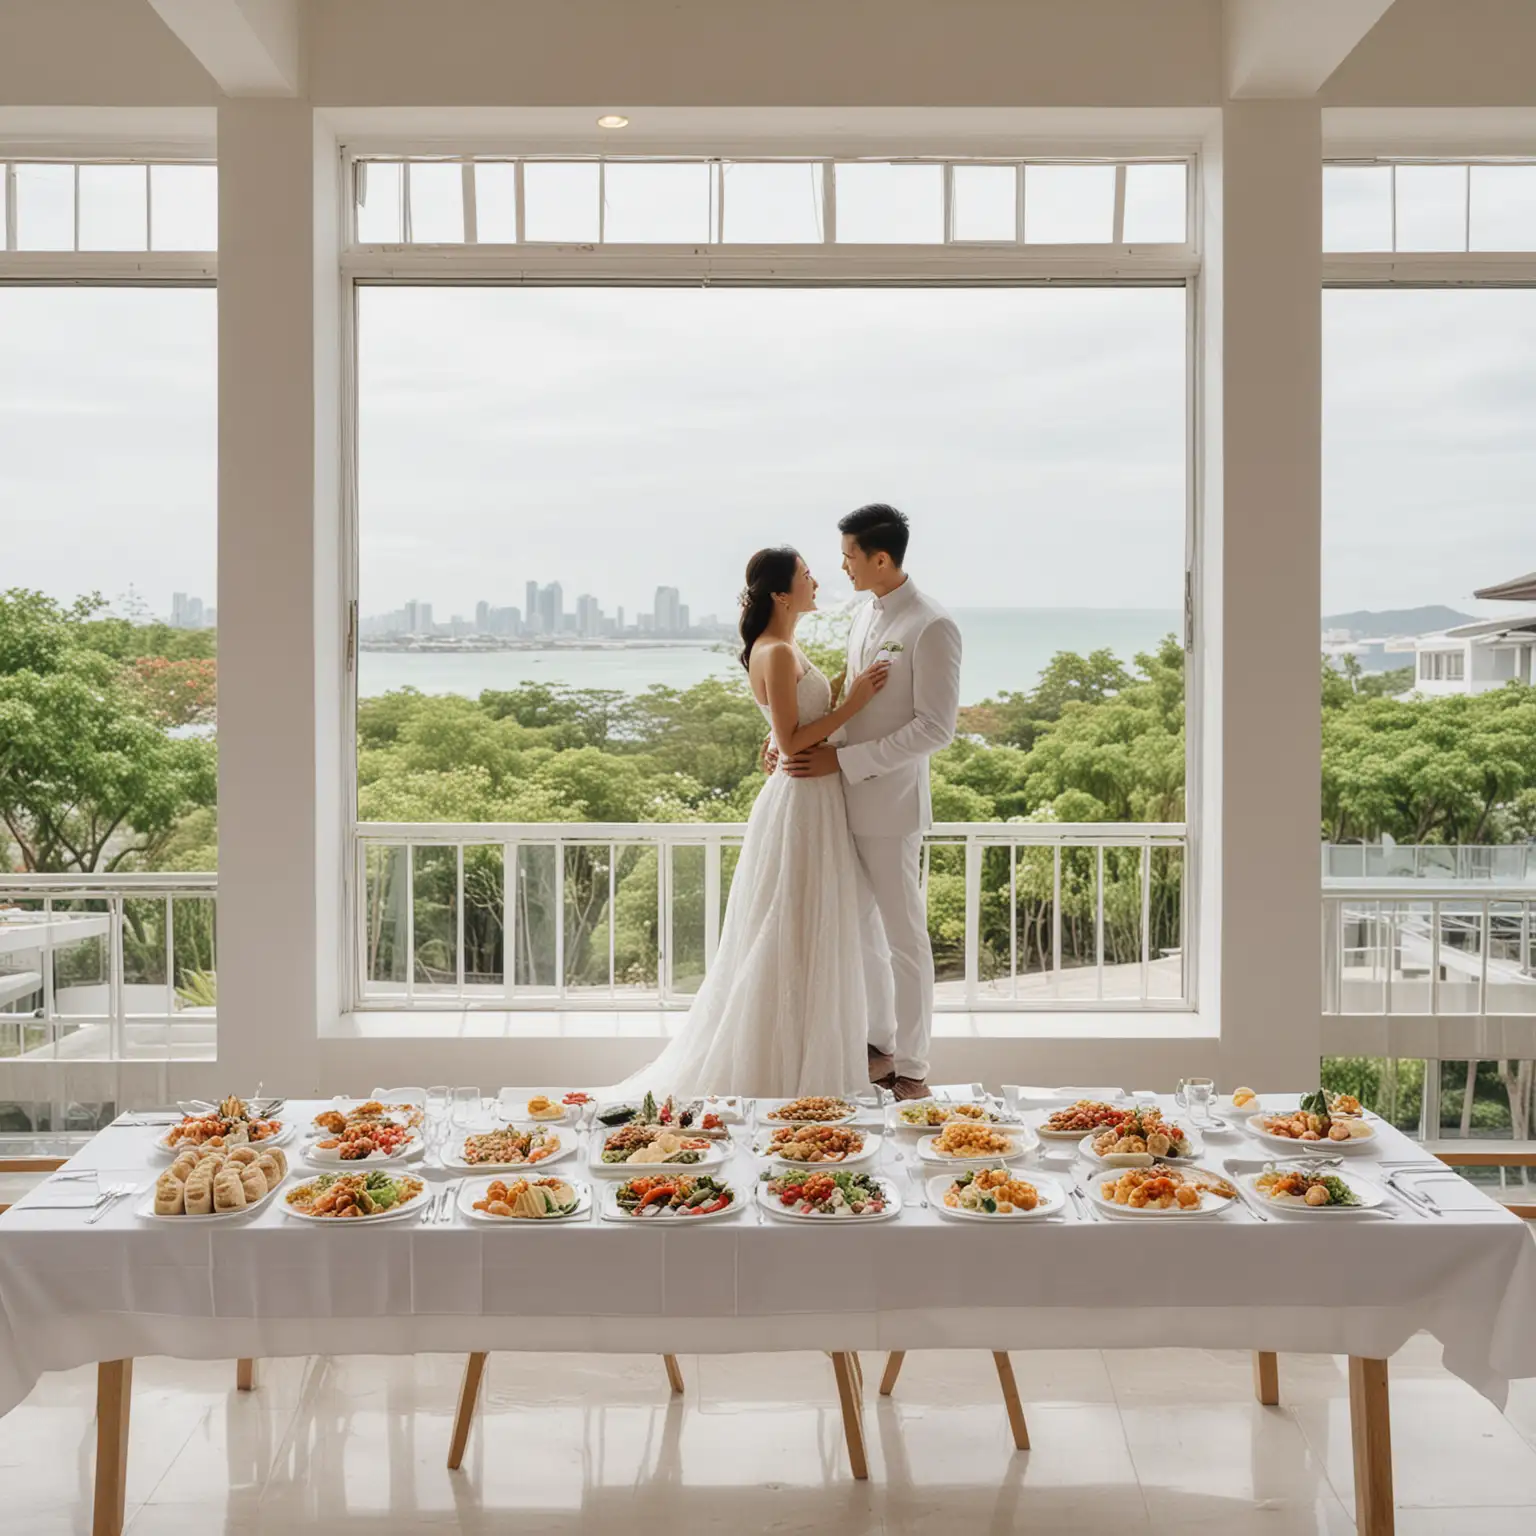 Asian Couple Enjoying Romantic Wedding Buffet Lunch by the Pool with Scenic White Window Frame View